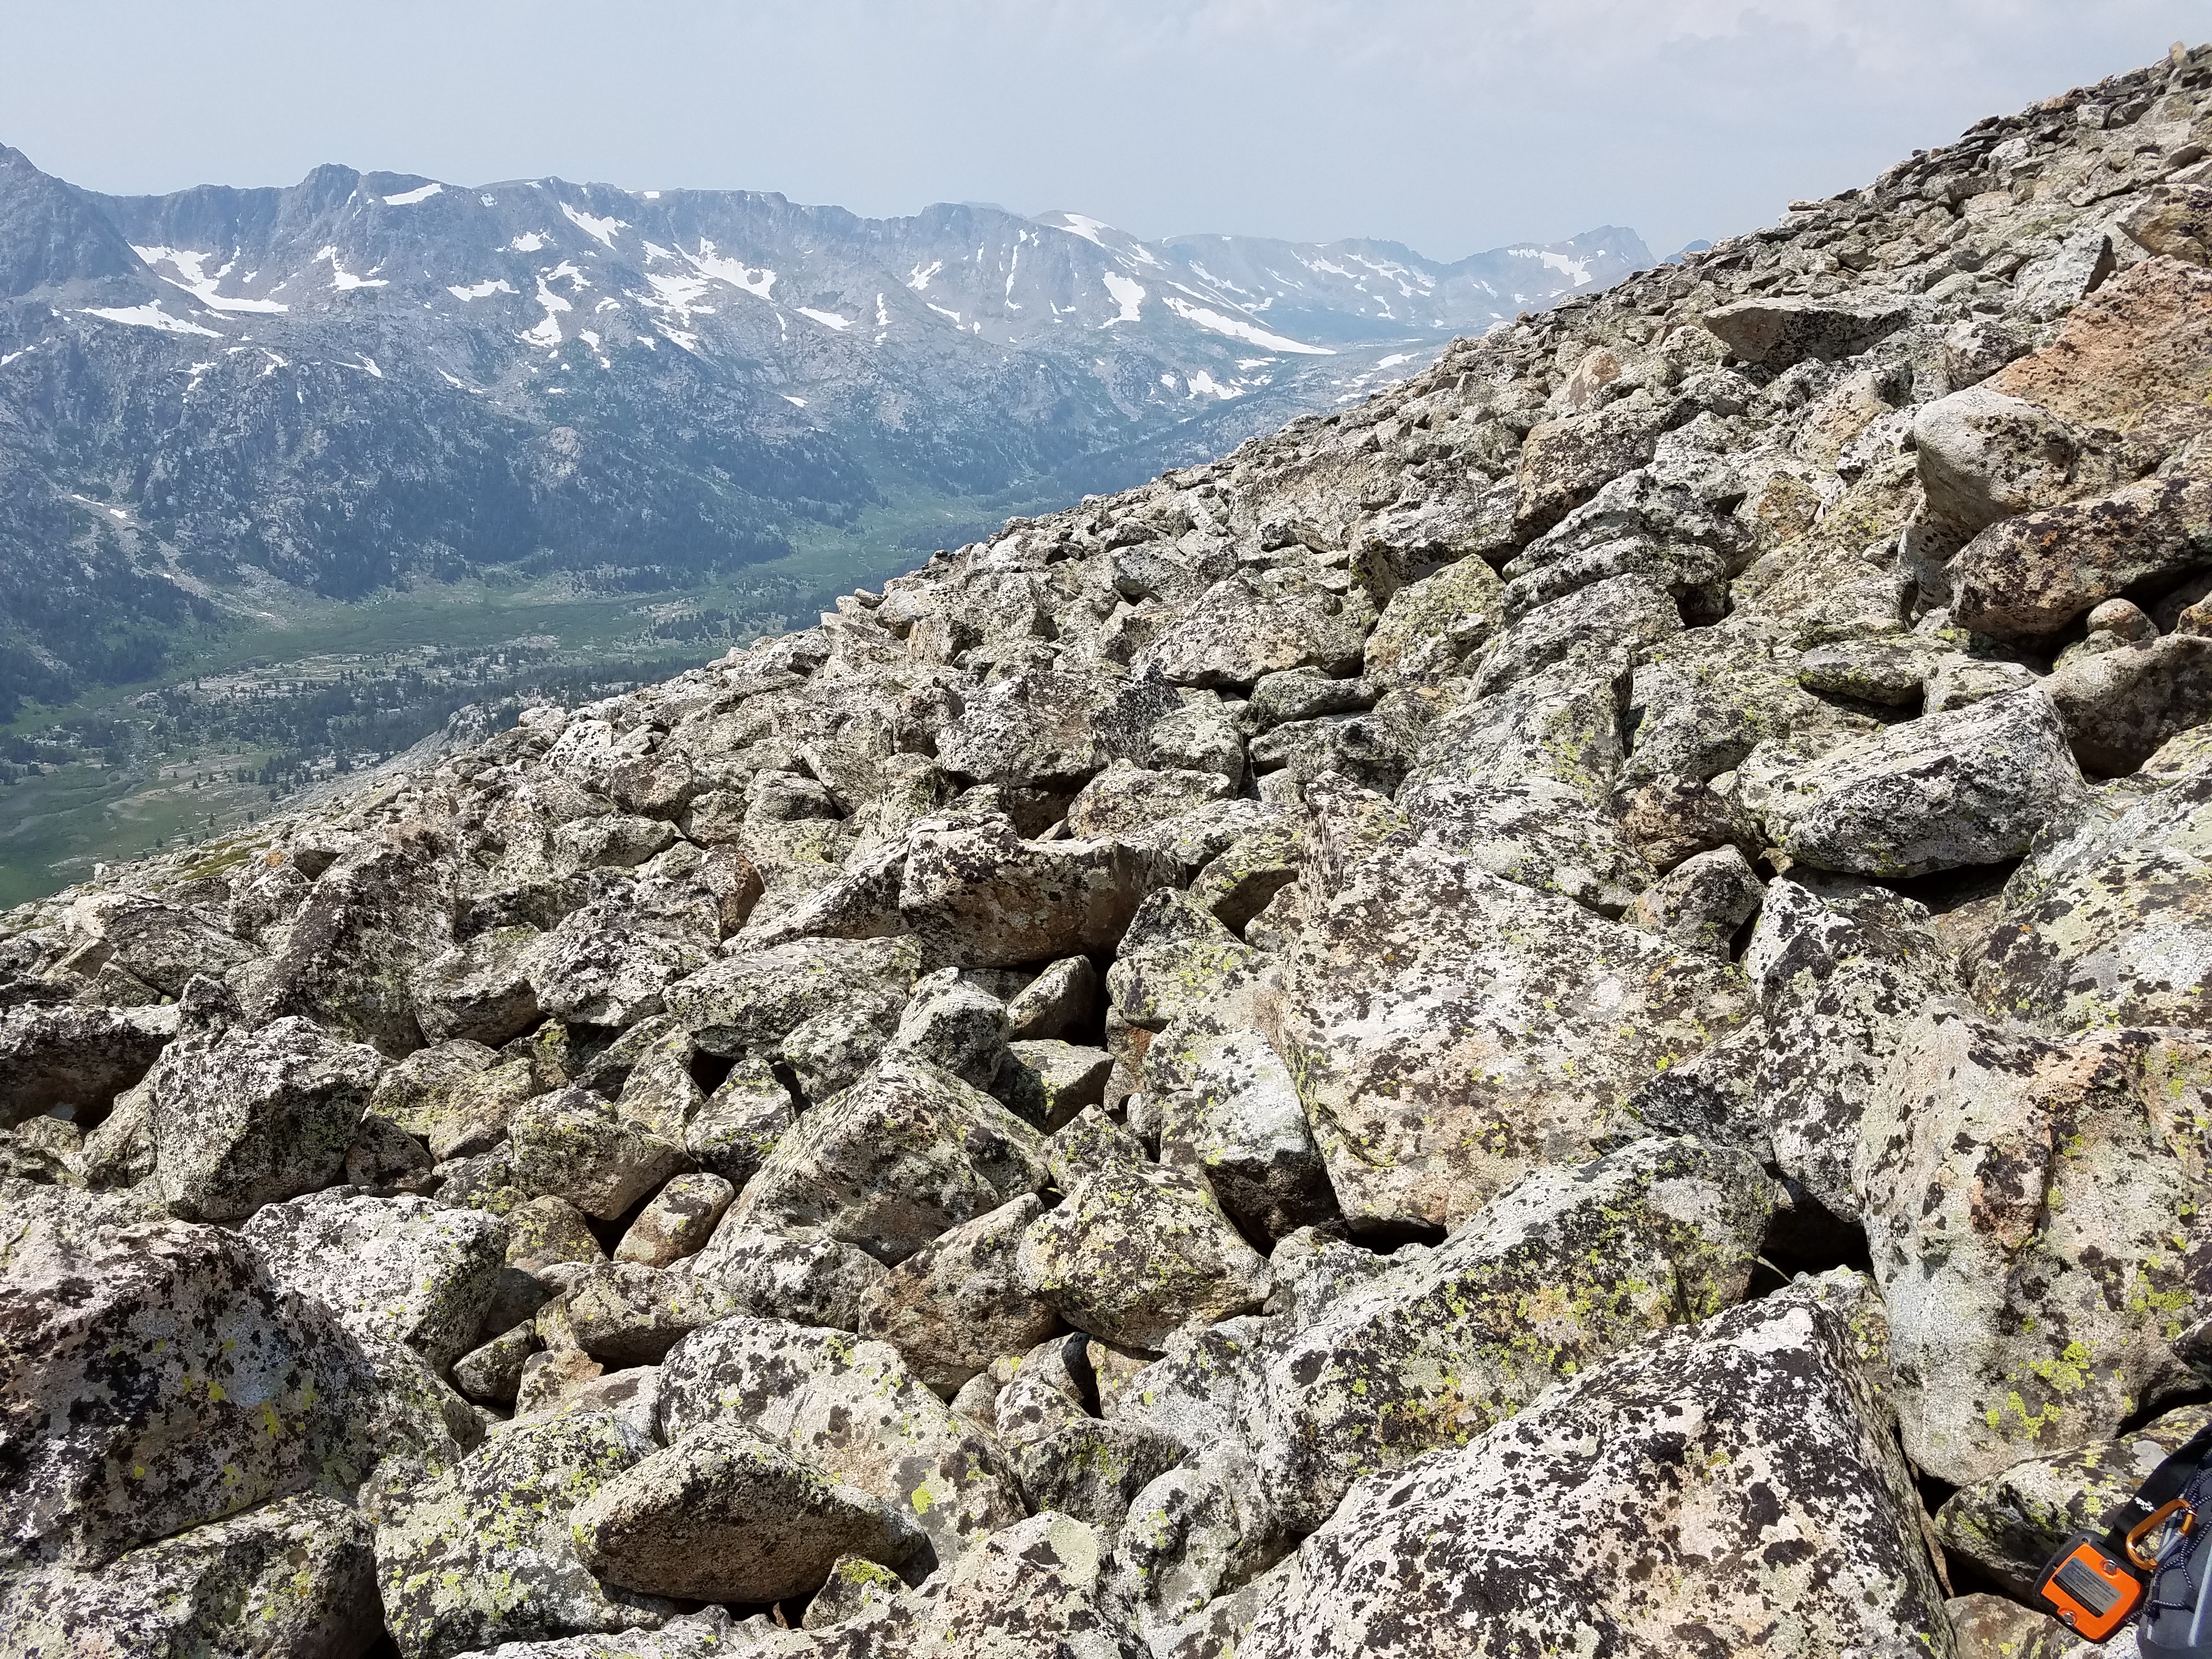 2017 Wind River Trip - Day 4 - Climbing Mount Victor (12,244 ft. Summit), American Pika, Richard's 1978 Fishing License, Mark's 1979 Driving Permit, Meteor Shower (Wind River Range, Wyoming)